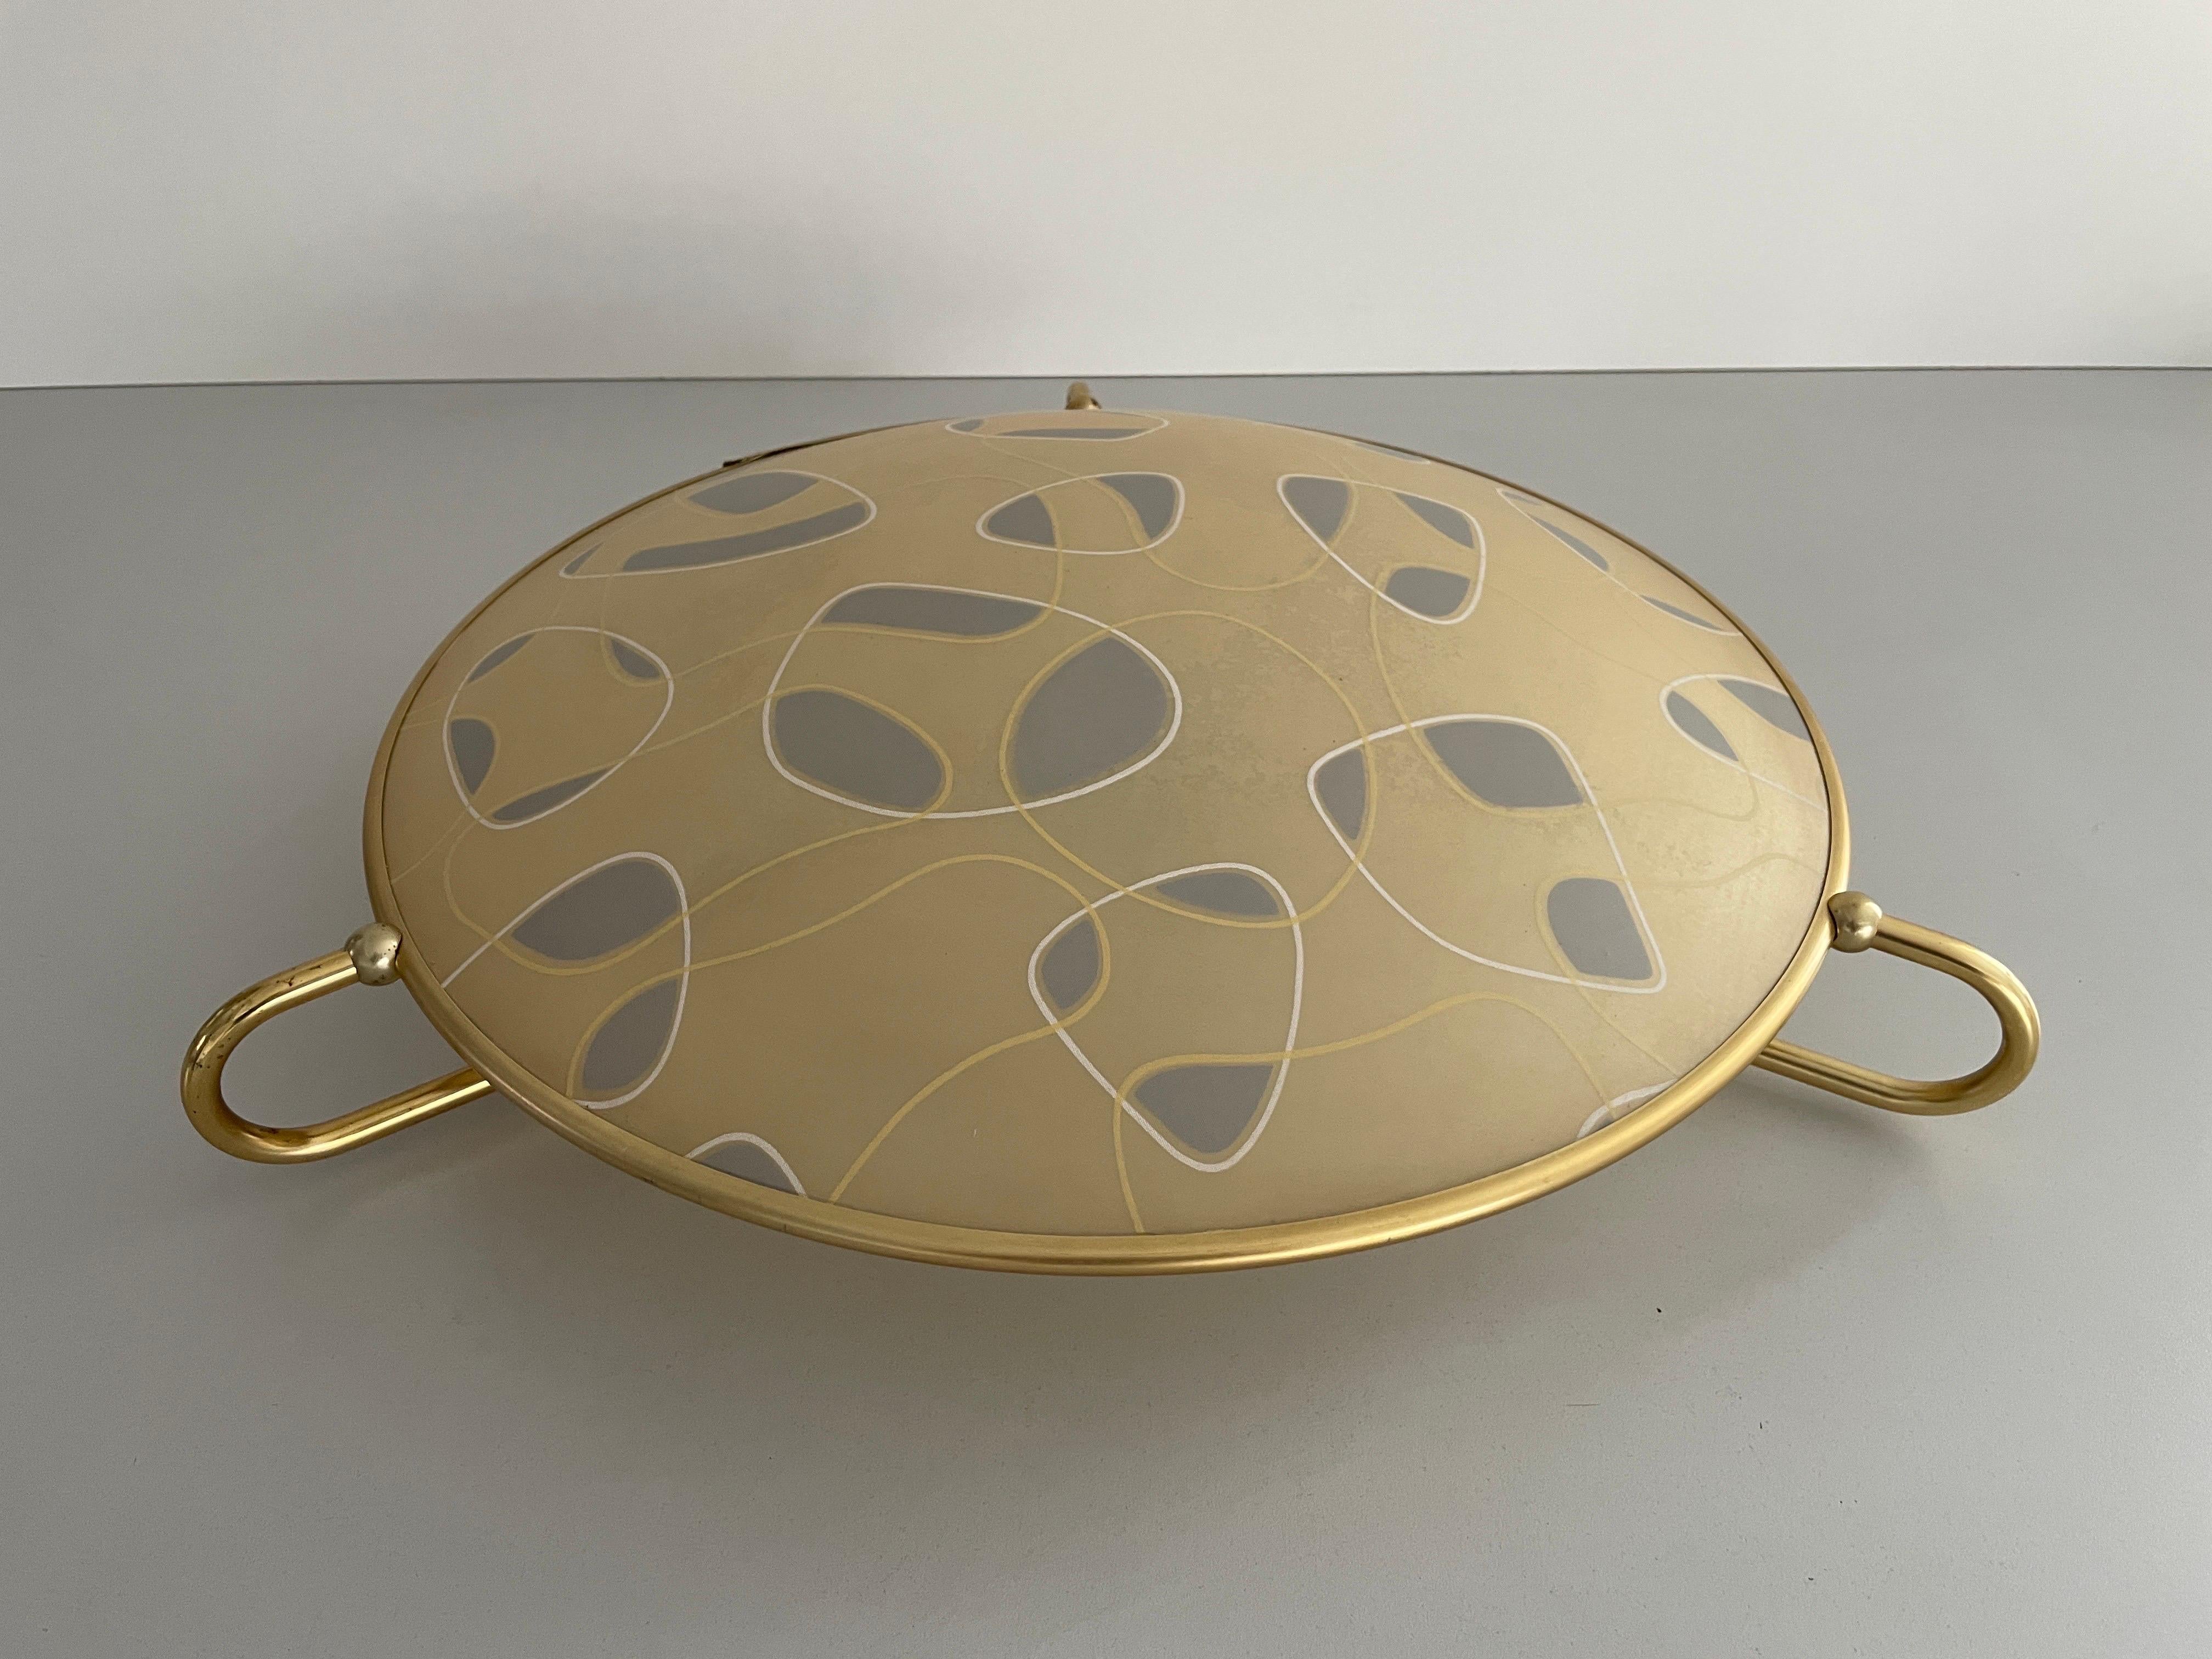 Mid-Century Modern Large Flush Mount or Ceiling Lamp by Erco, 1950s, Germany

Lampshade is in very good vintage condition.

This lamp works with 2x E27 light bulbs. 
Wired and suitable to use with 220V and 110V for all